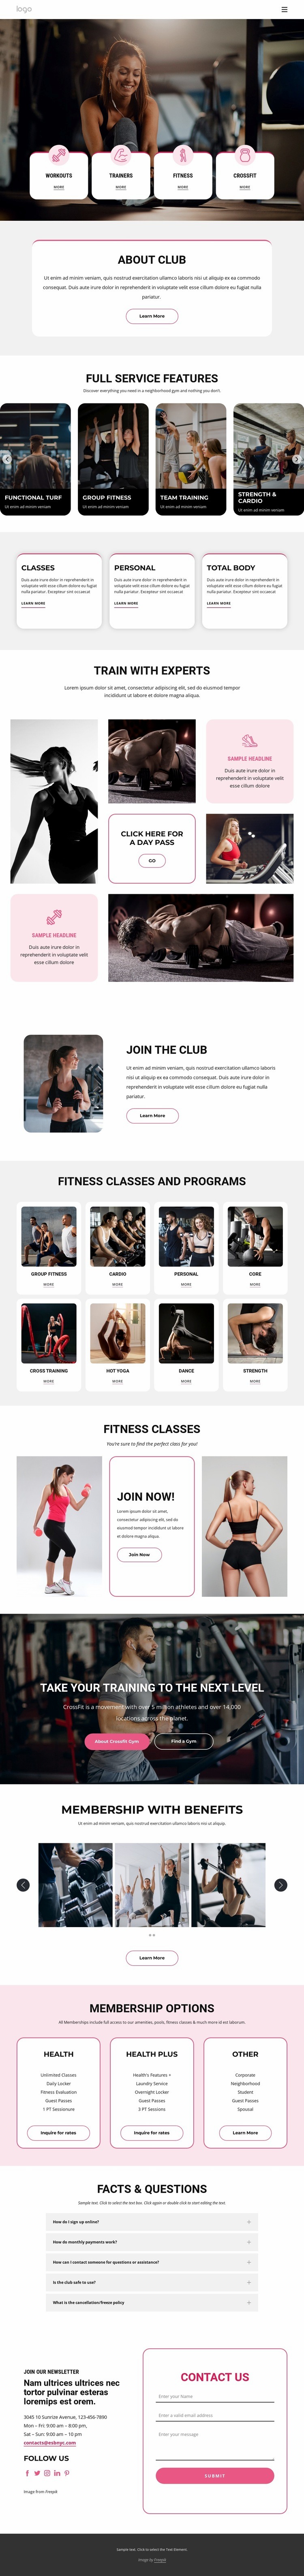 Our full-service gym Homepage Design